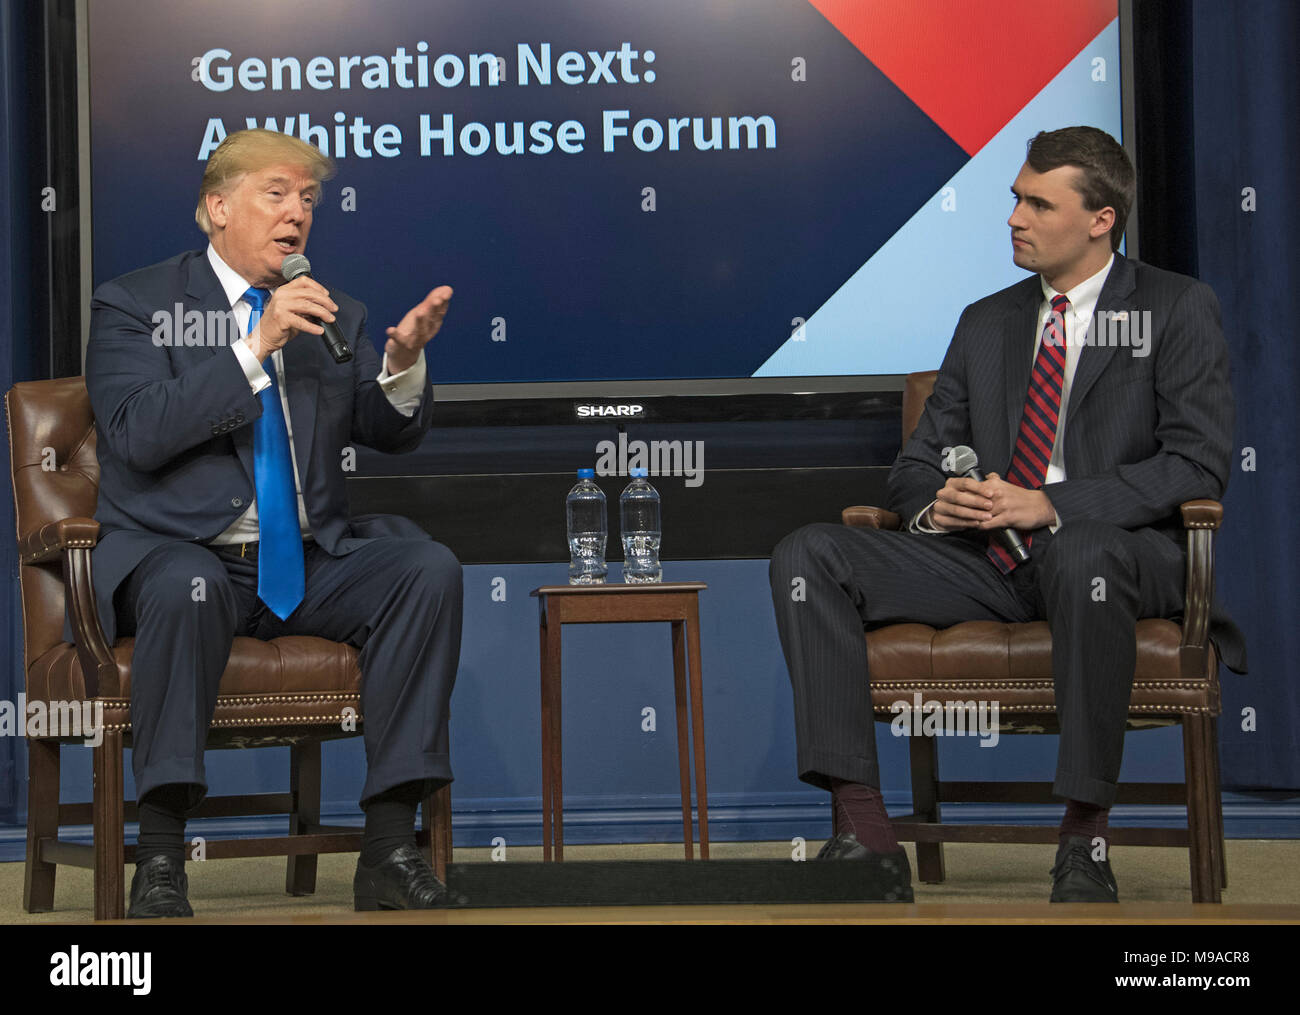 Washington, USA. 22nd Mar, 2018. United States President Donald J. Trump, left, participates in a panel discussion with Charlie Kirk, Founder and Executive Director of Turning Point USA, right, at the Generation Next Summit at the White House in Washington, DC on Thursday, March 22, 2018. Credit: Ron Sachs/CNP - NO WIRE SERVICE · Credit: Ron Sachs/Consolidated News Photos/Ron Sachs - CNP/dpa/Alamy Live News Stock Photo